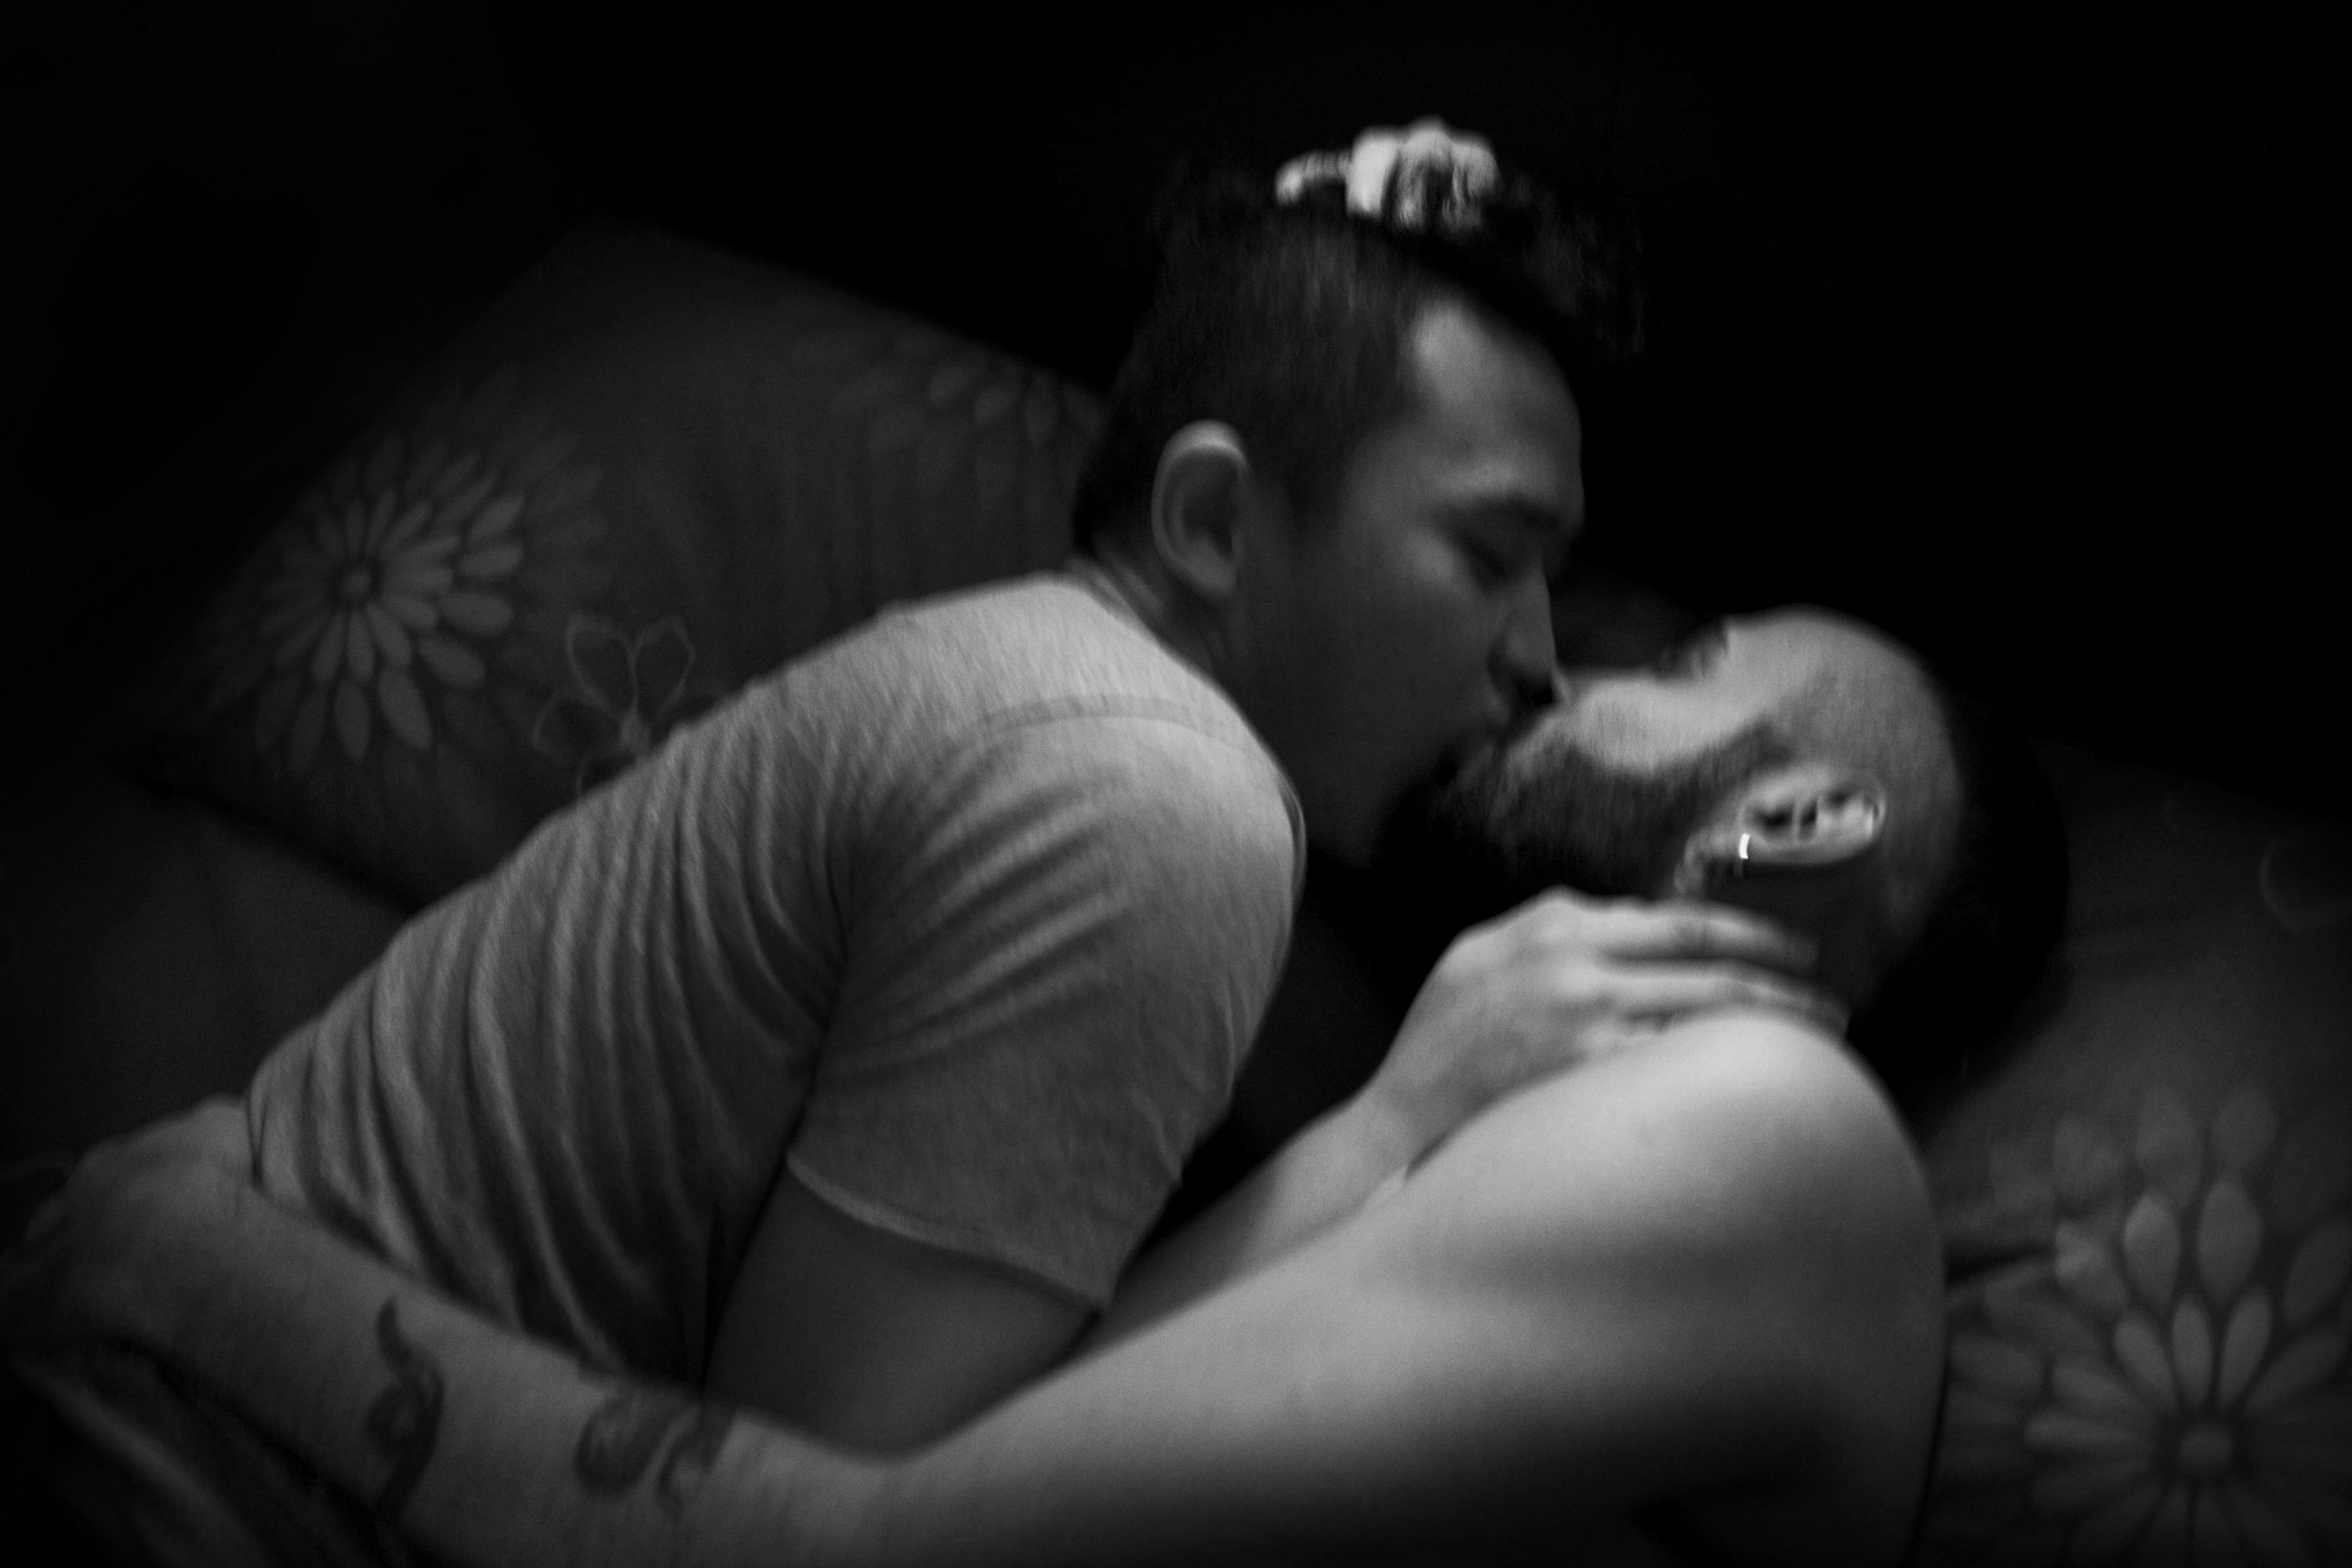 © Hashem Shakeri. 	(2014) Pedram and Gibbson are caressing each other in home . Cyberjaya, Malaysia. Homosexuality is illegal in the Islamic Republic of Iran, just like other Islamic countries.  Pedram is a 26 year old homosexual who lives in Iran. He was forced to emigrate from Iran 4 years ago despite his real love for his partner. Although his family did their best to understand his situation, social oppression, limitations, insults and harassments obliged him to emigrate to Malaysia . It has been a year and a half that he has been living with his new partner, Gibbson, in Cyberjaya, Malaysia, continuing his studies and developing his art.